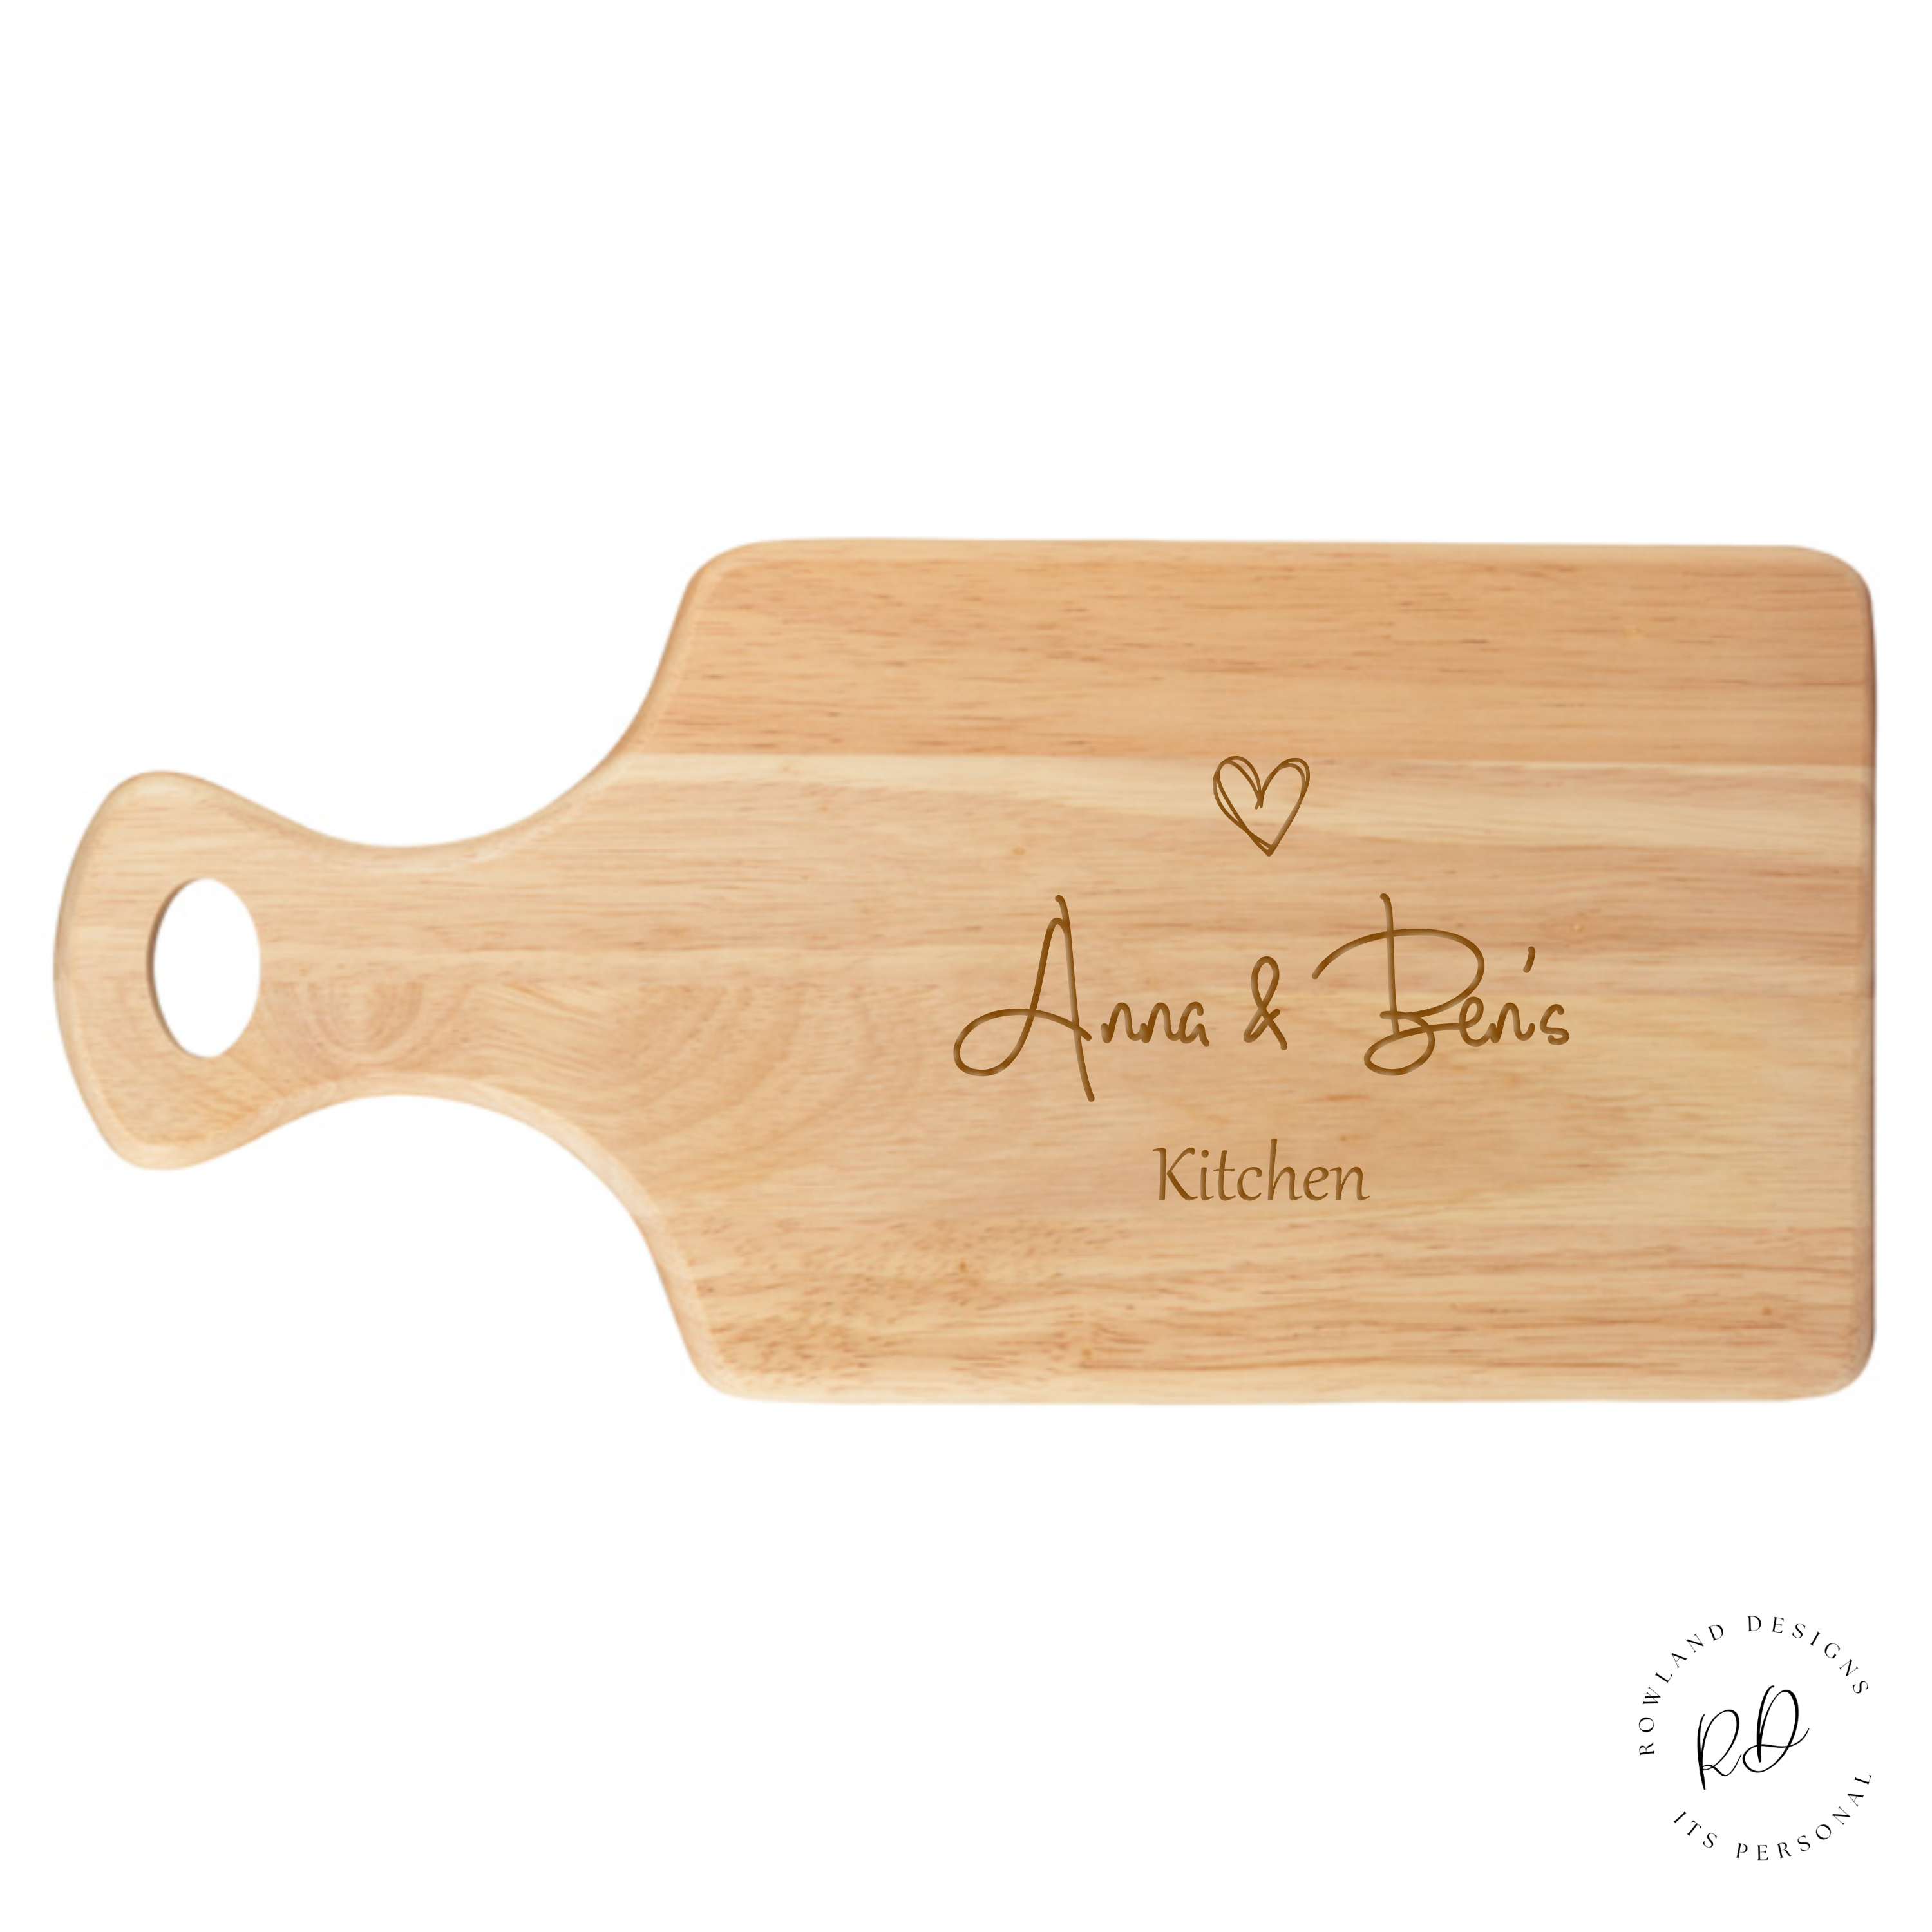 Elegant Personalized Serving Board perfect for hosting occasions